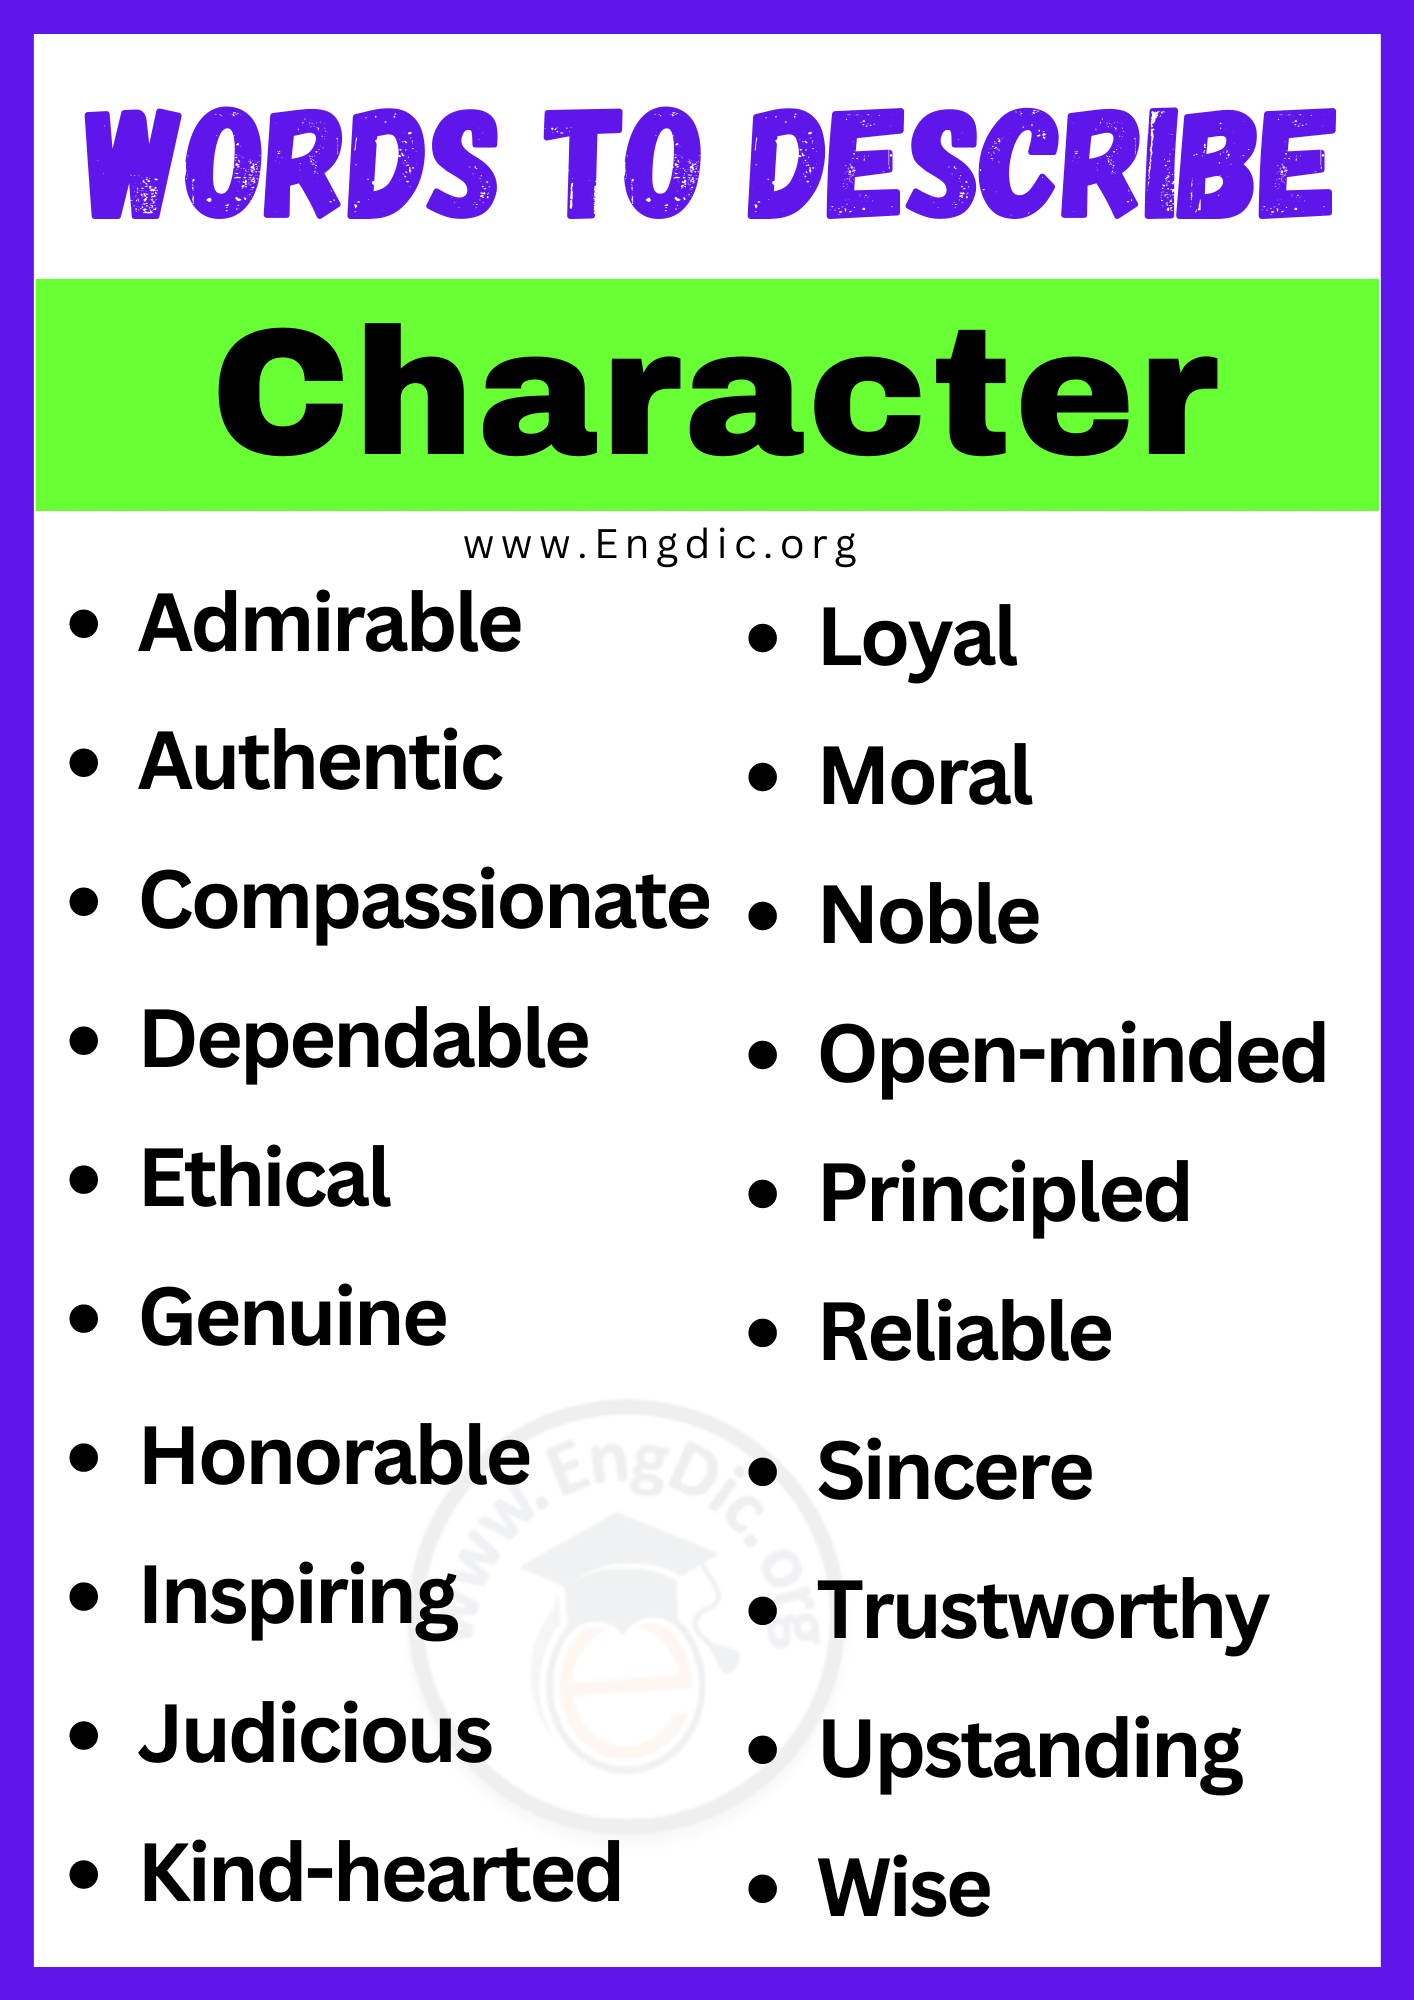 Words to Describe Character